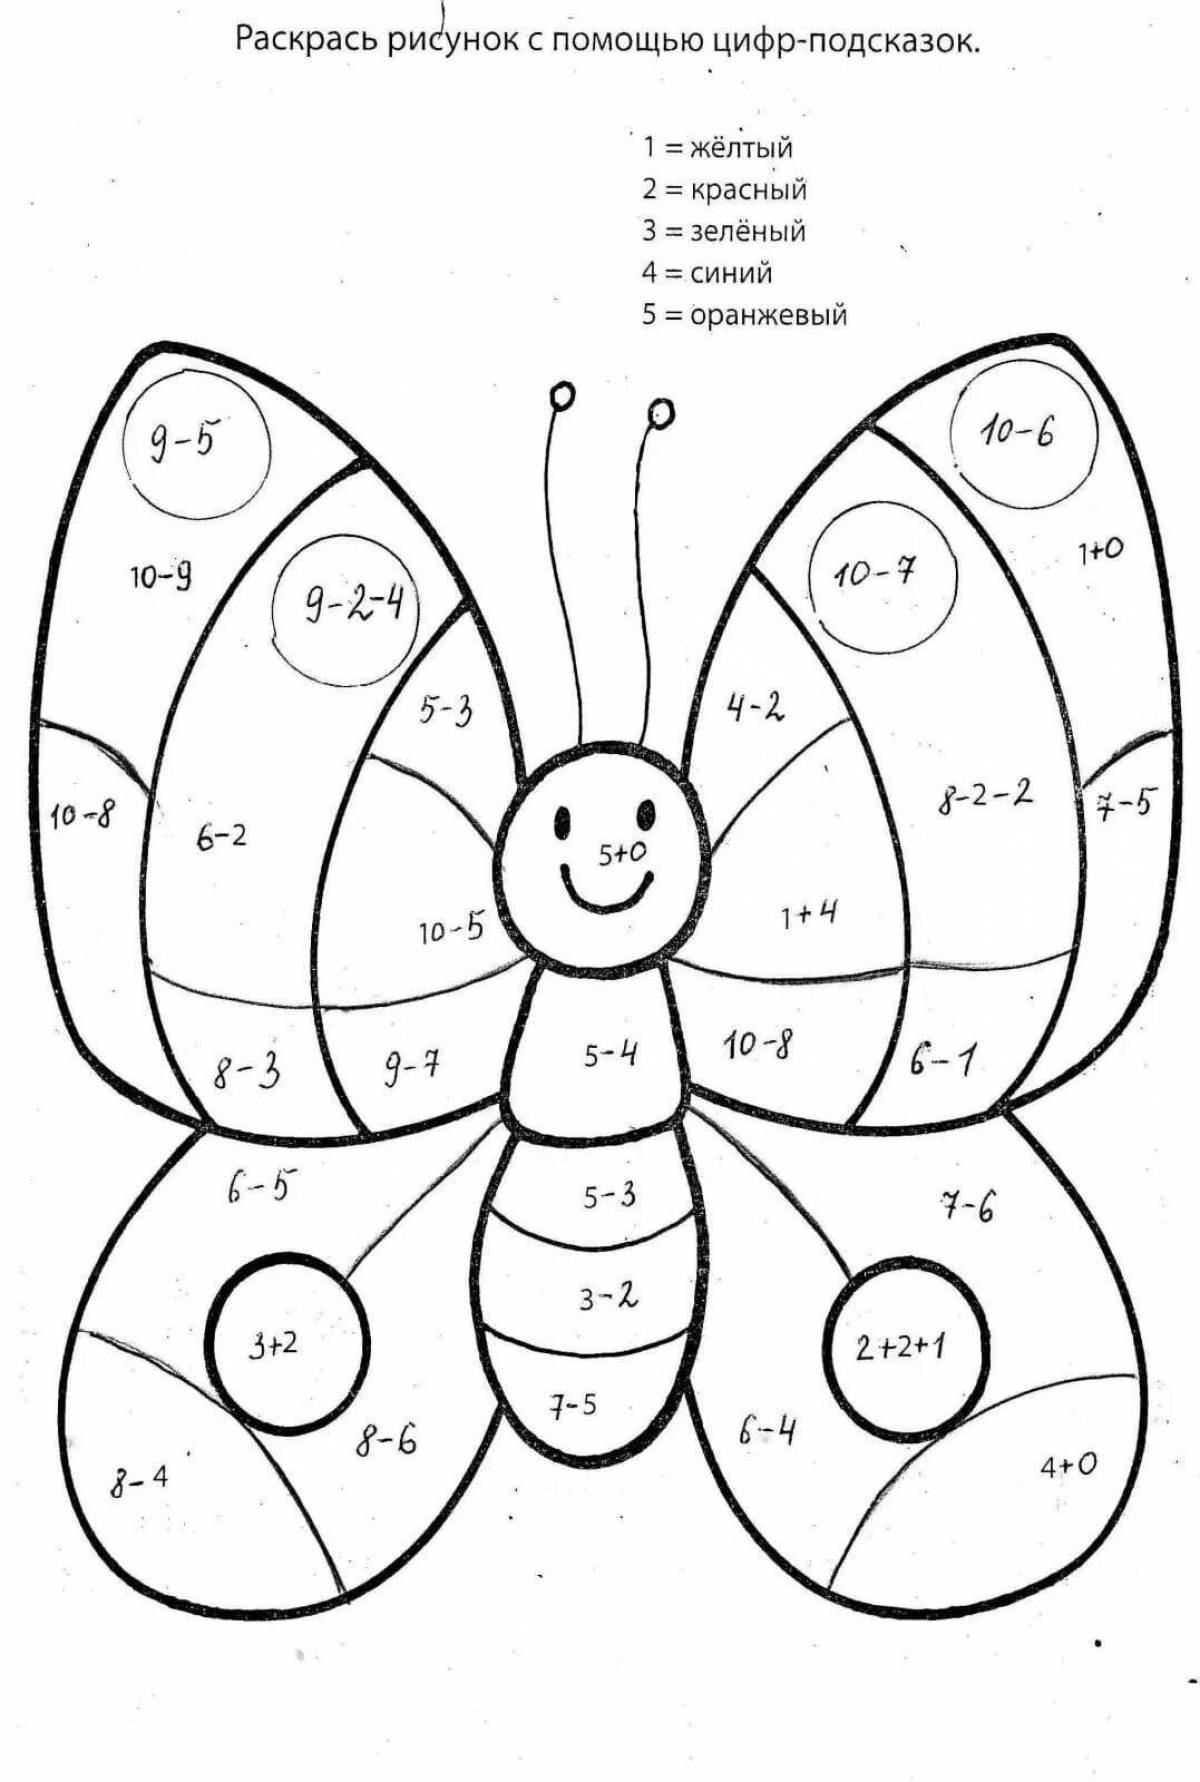 Creative math coloring book for kids 5-7 years old